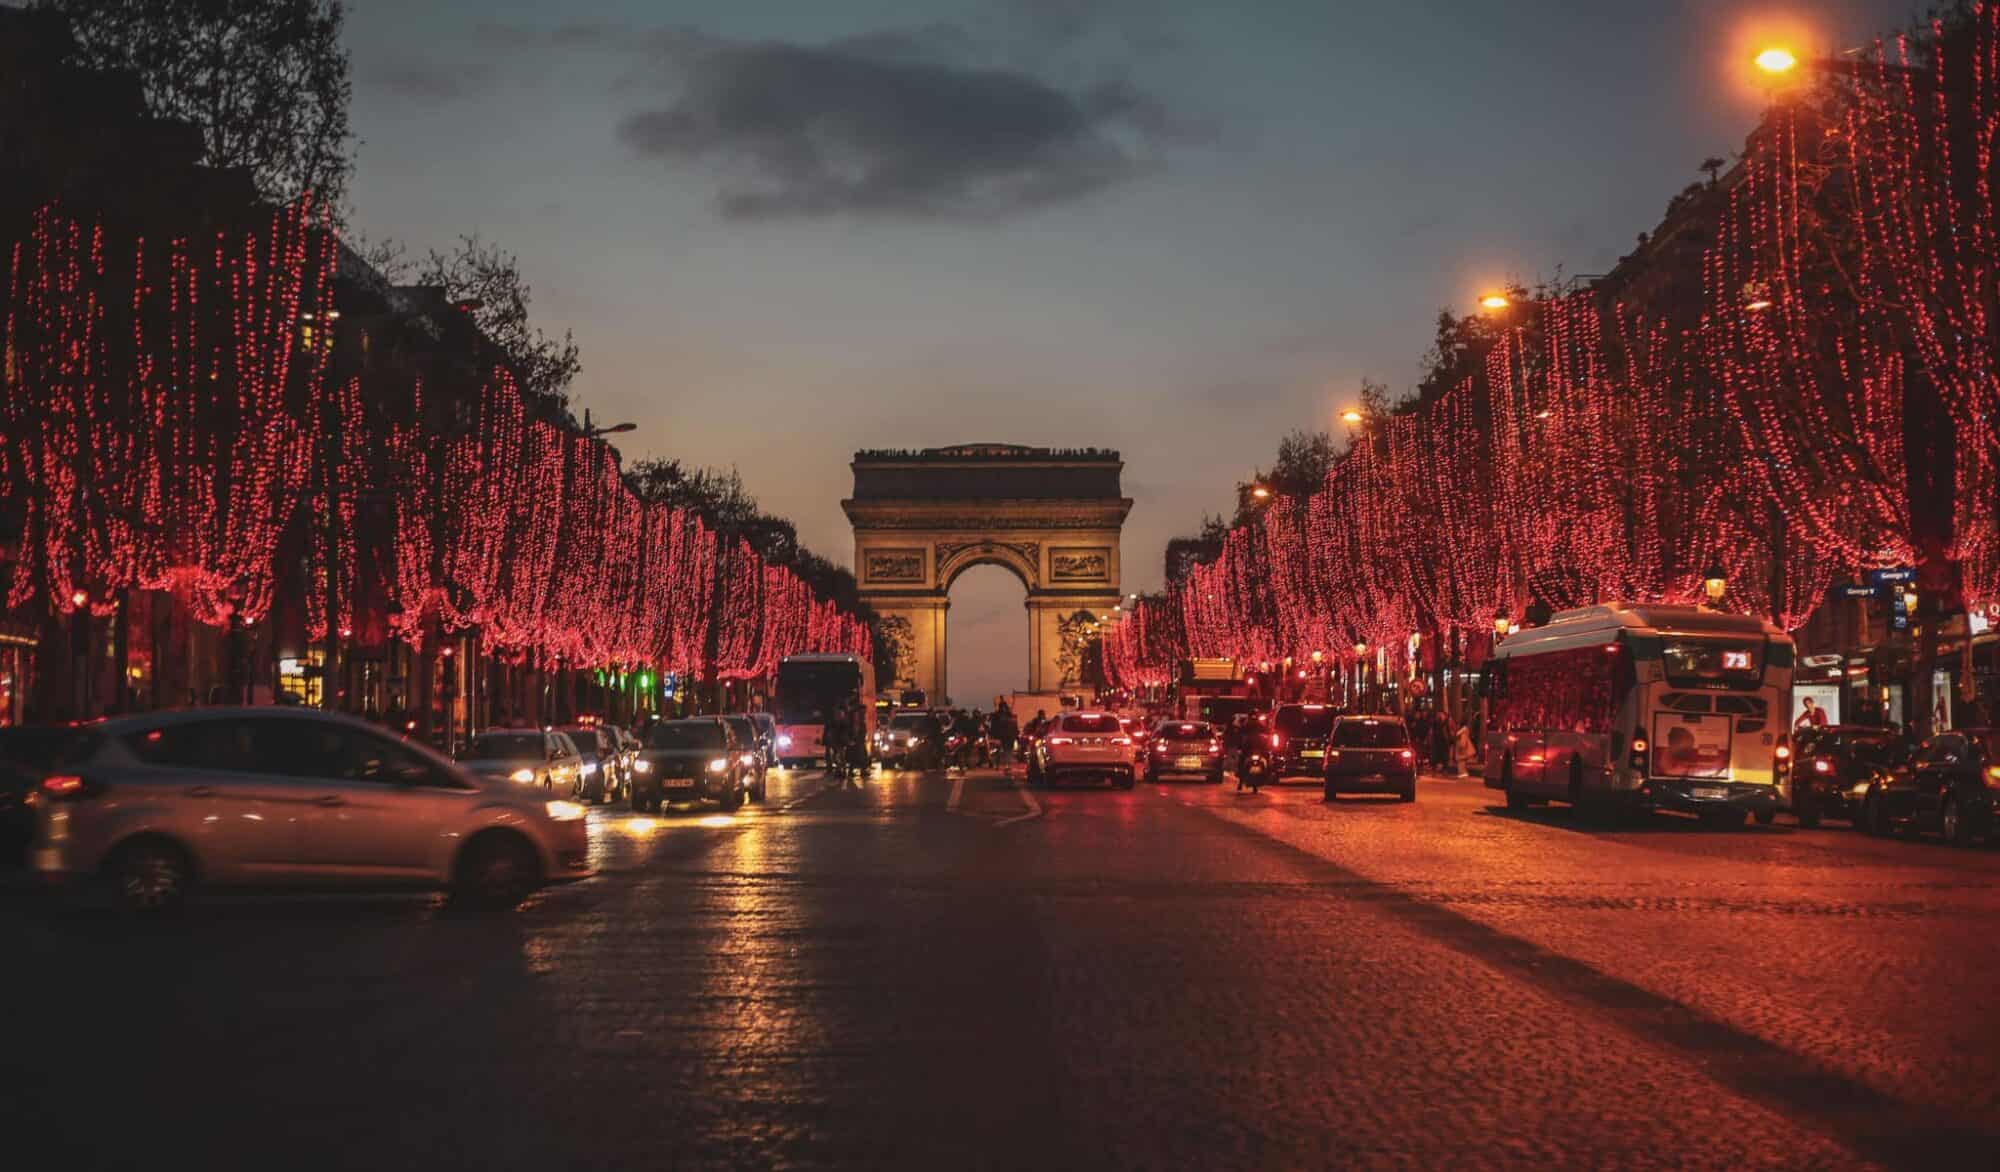 The Arc de Triomphe at night during Christmas with a row of trees with festive red lights.